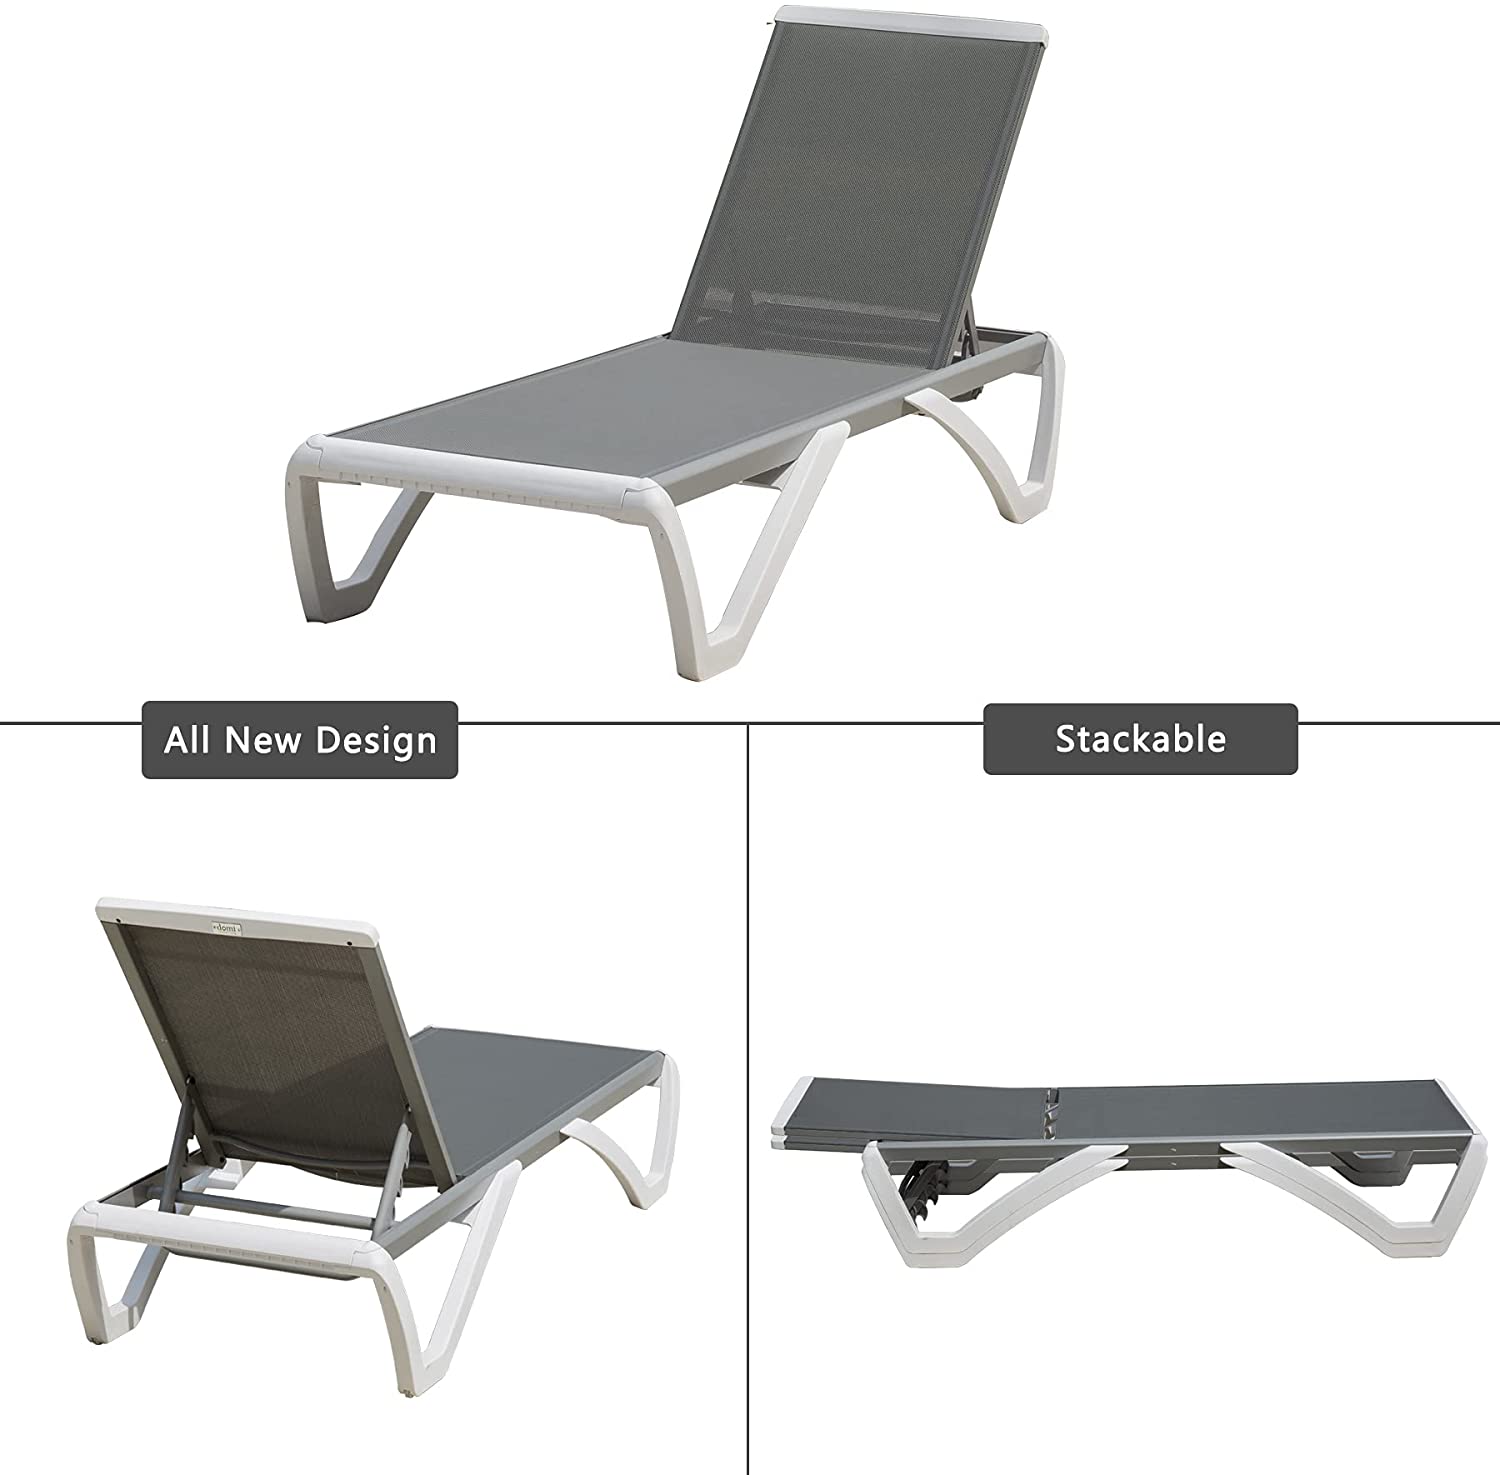 Domi Patio Chaise Lounge Chair Set of 3,Outdoor Aluminum Polypropylene Sunbathing Chair with Adjustable Backrest,Side Table,for Beach,Yard,Balcony,Poolside(2 Grey Chairs W/Table) - image 5 of 8